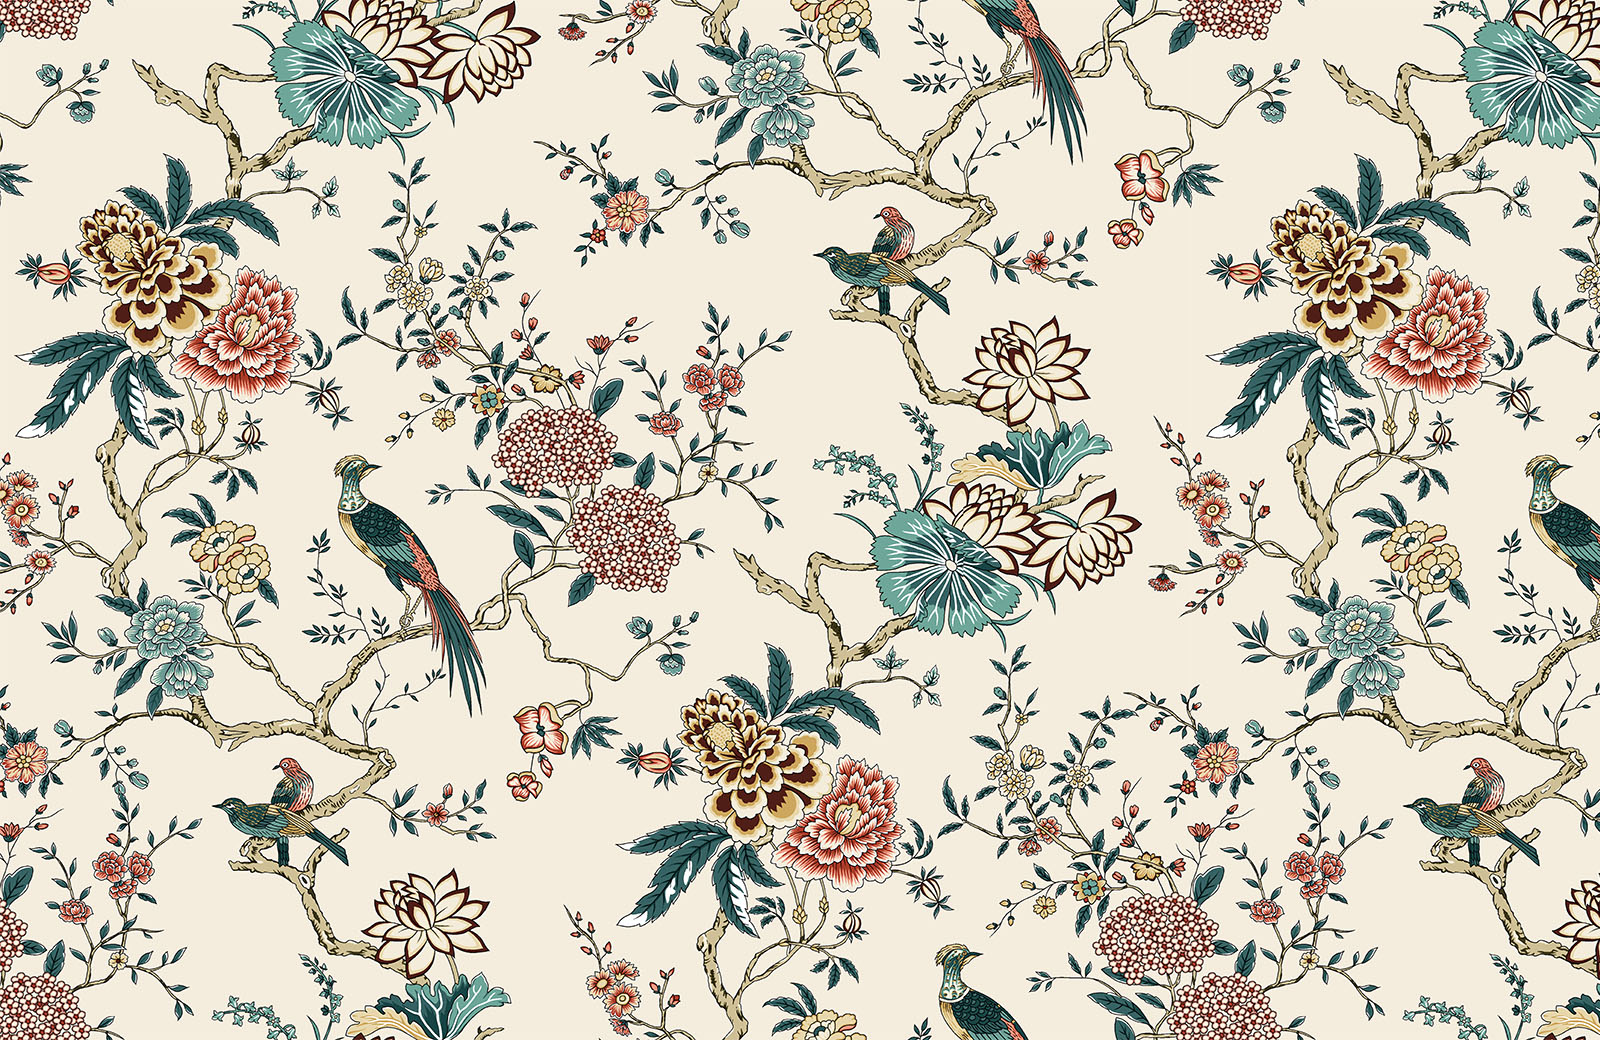 chinoiserie-pattern-with-birds-and-flowers-wallpaper-design